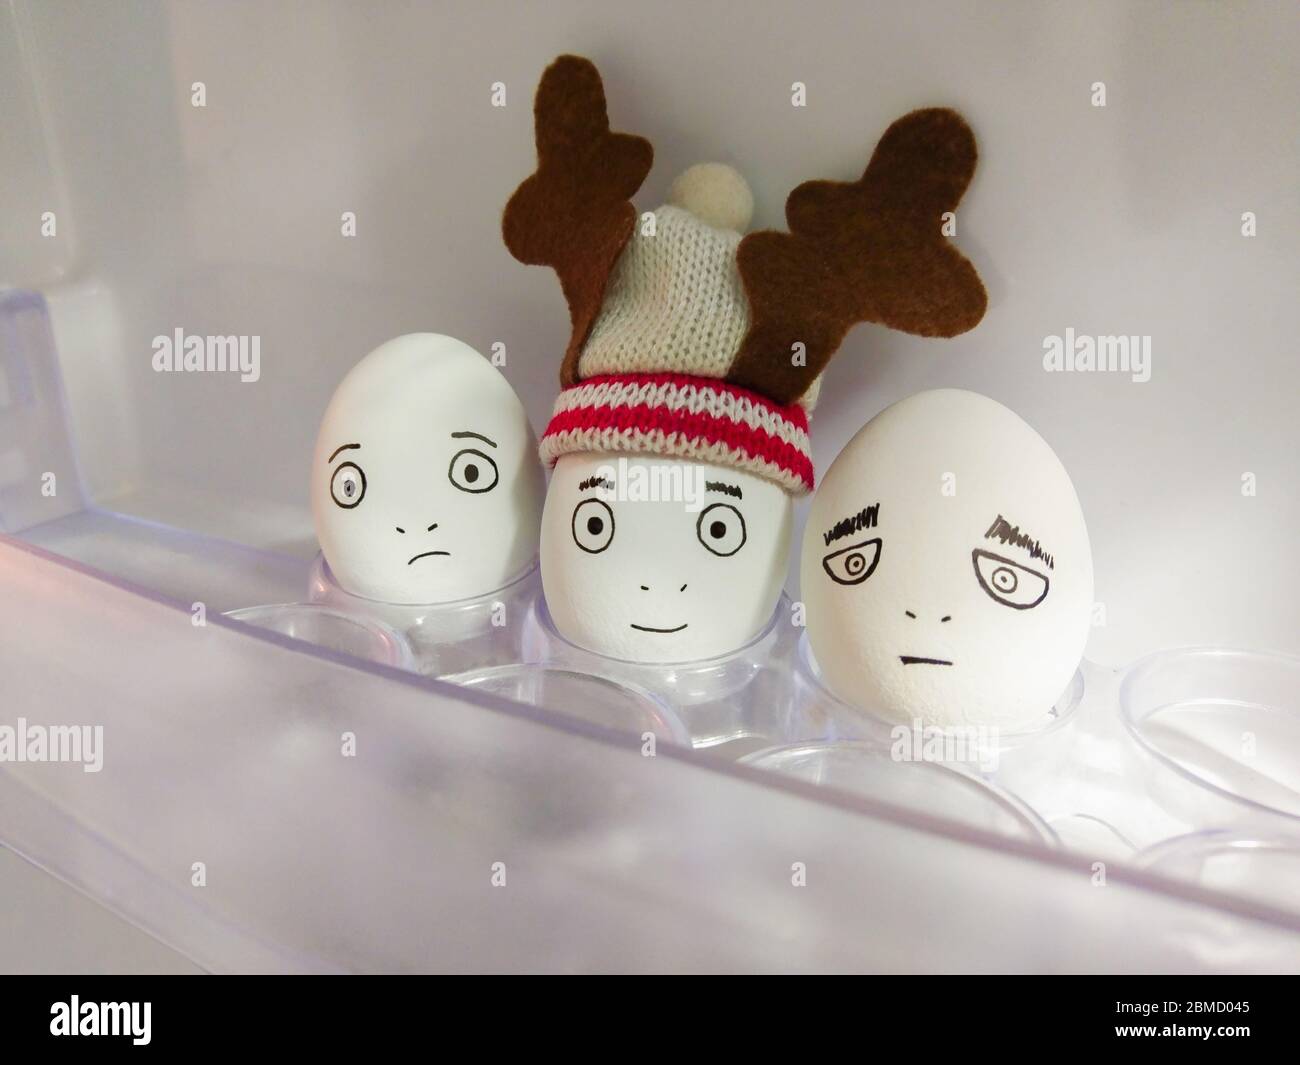 Three white chicken eggs with faces drawn on them. Central egg wearing funny warm hat with plush antlers. Fridge door interior. Funny decorating idea. Stock Photo